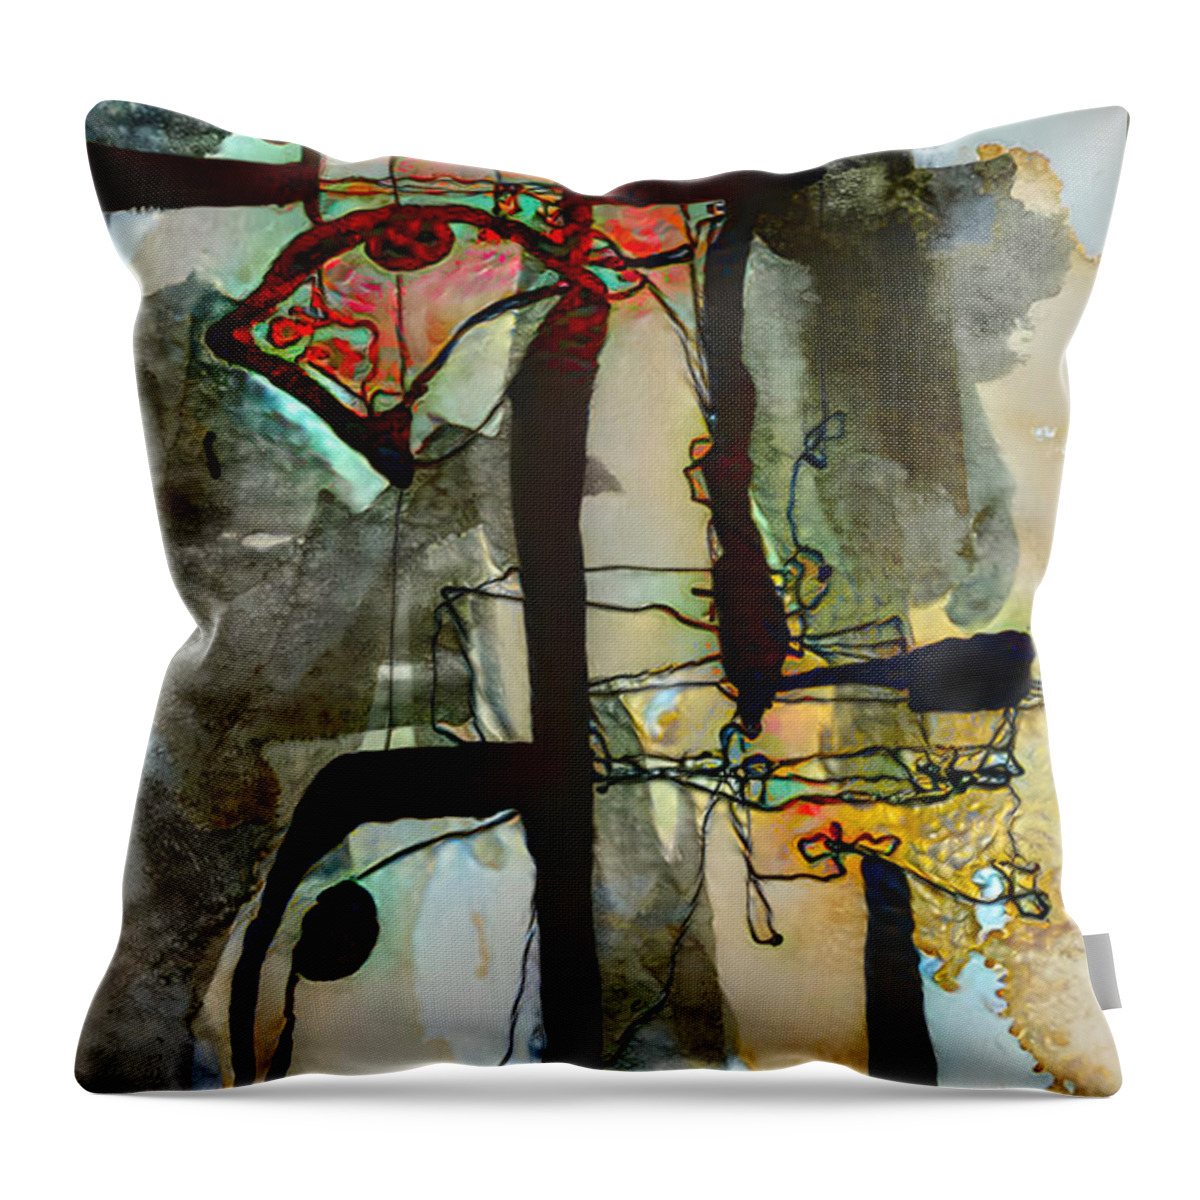 Contemporary Art Throw Pillow featuring the digital art 59 by Jeremiah Ray